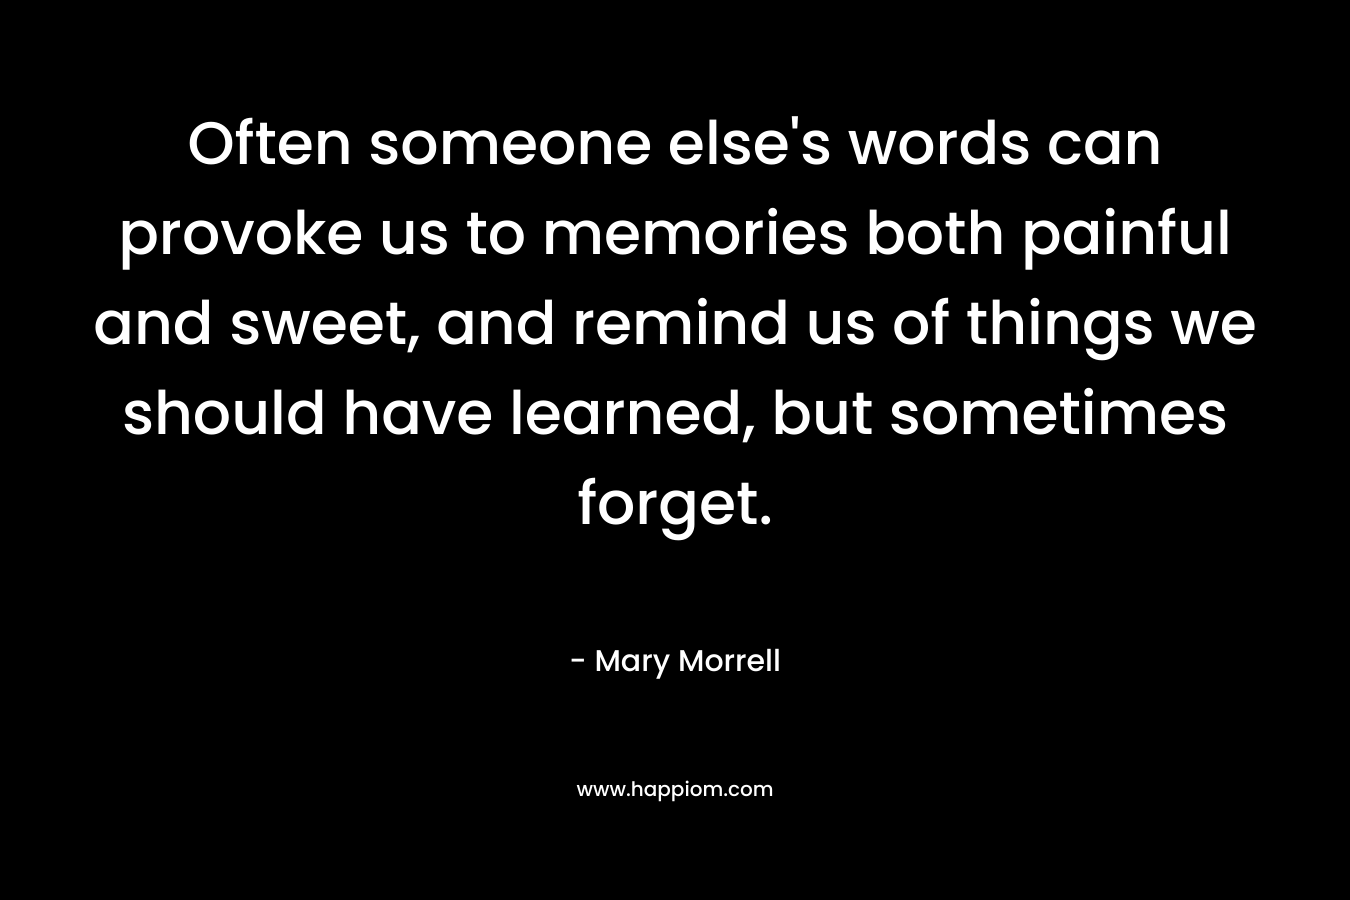 Often someone else’s words can provoke us to memories both painful and sweet, and remind us of things we should have learned, but sometimes forget. – Mary Morrell